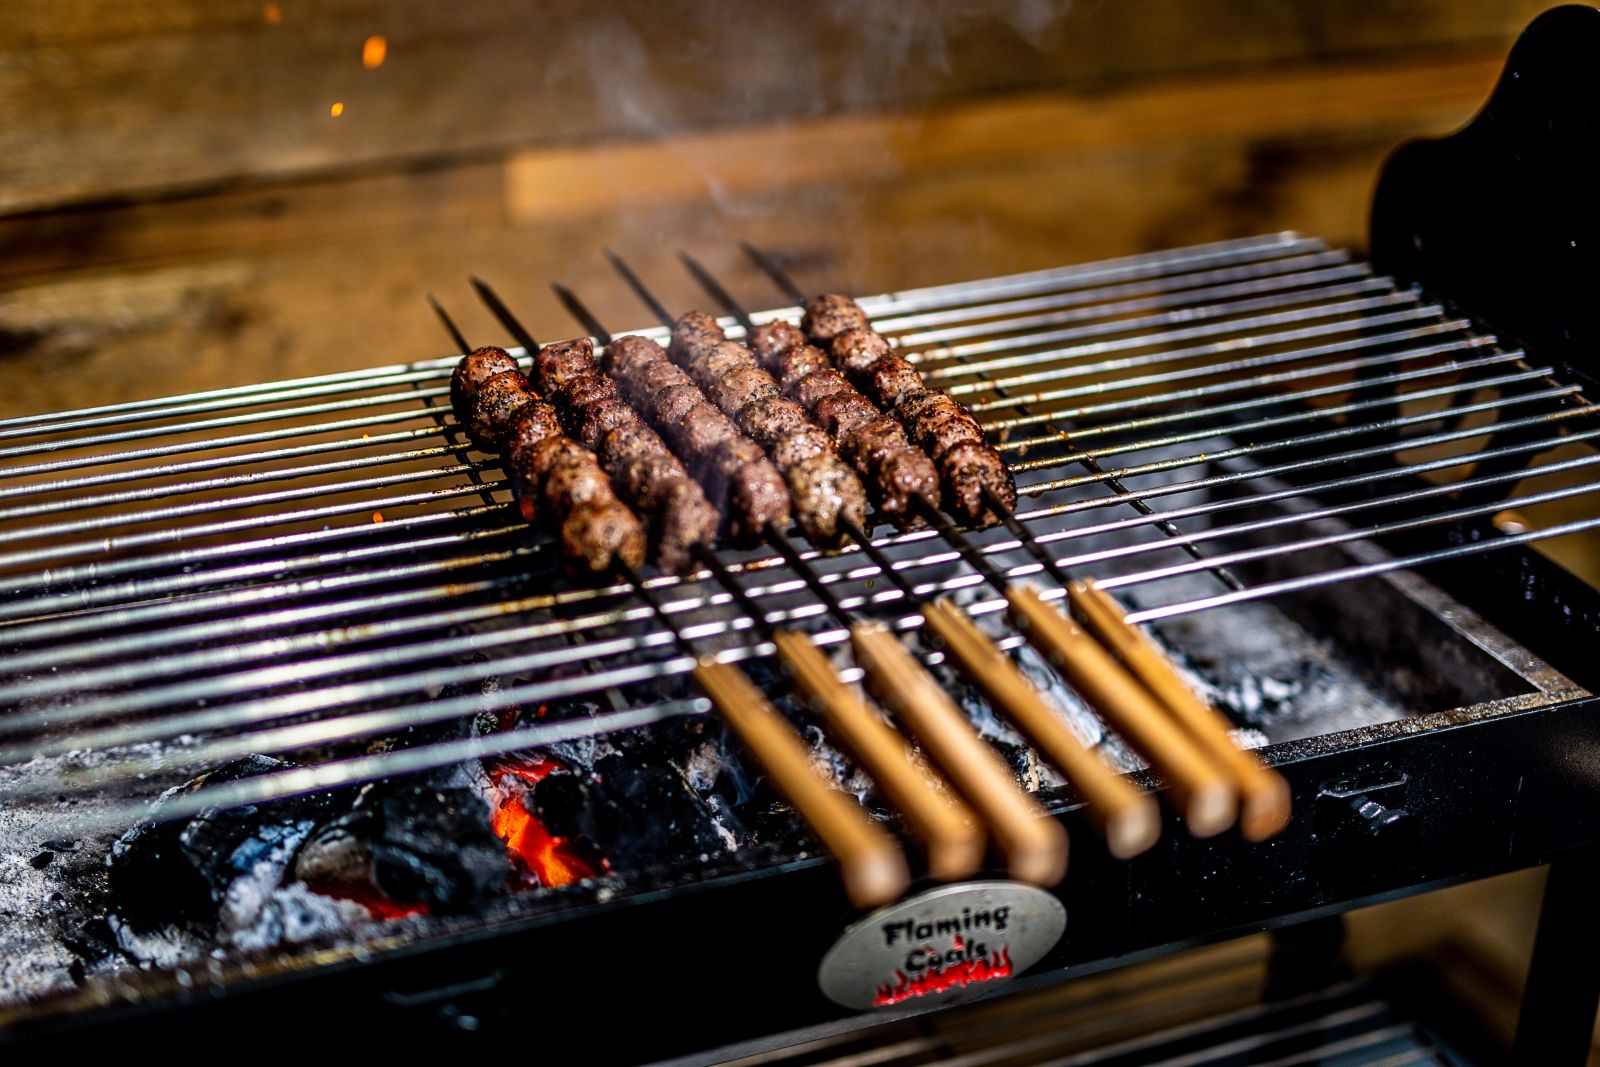 This image shows meatballs being cooked using our new Flat metal Kebab skewer